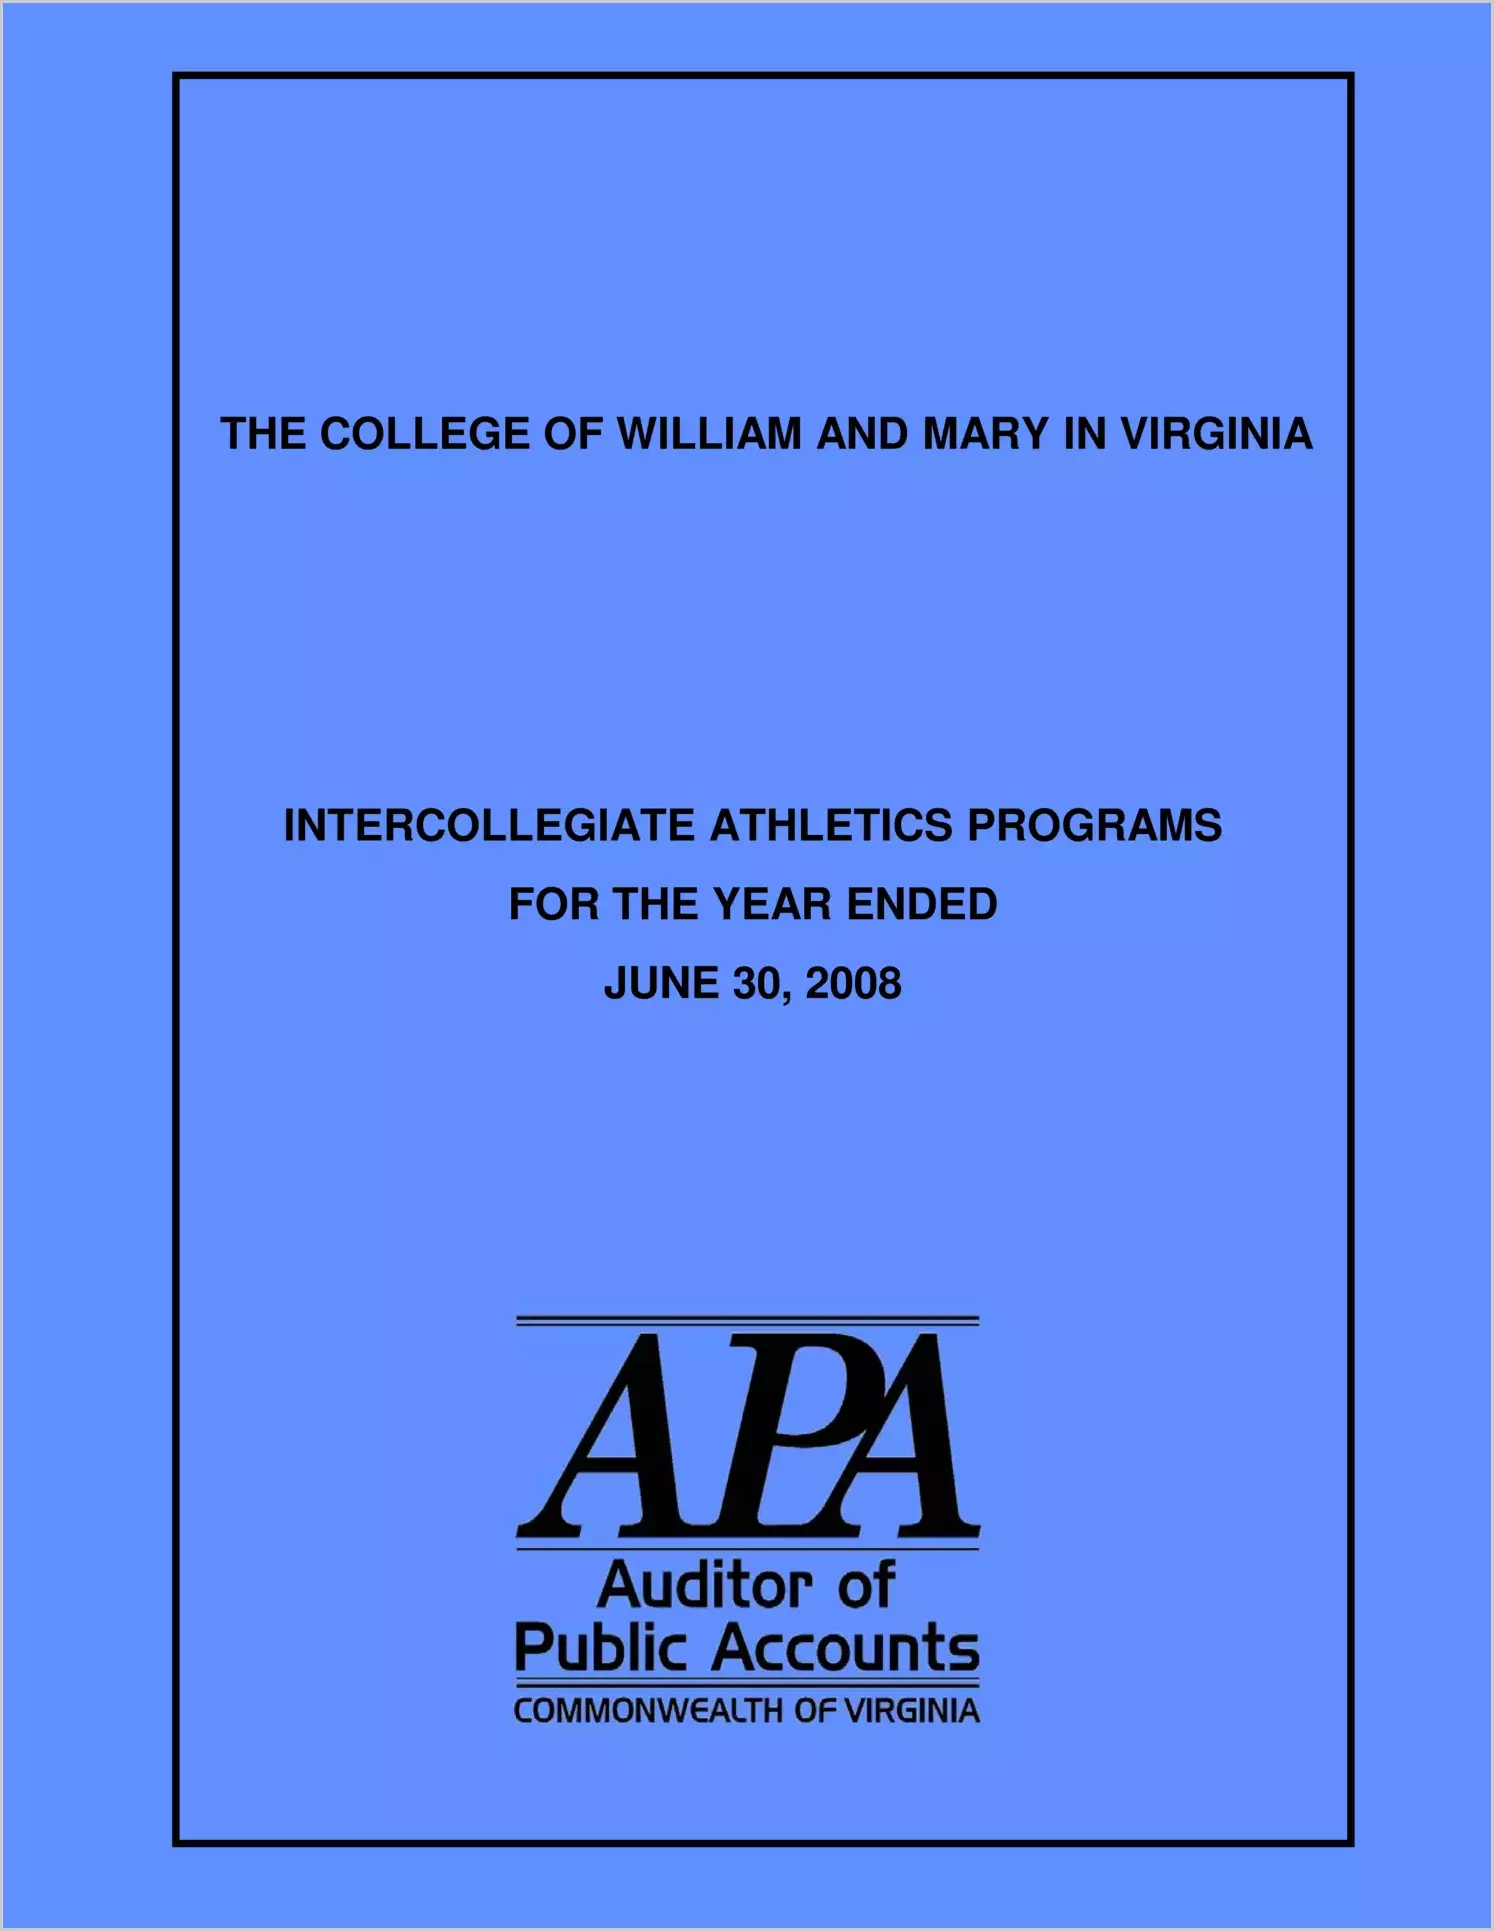 The College of William and Mary in Virginia Intercollegiate Athletics Programs for the year ended June 30, 2008